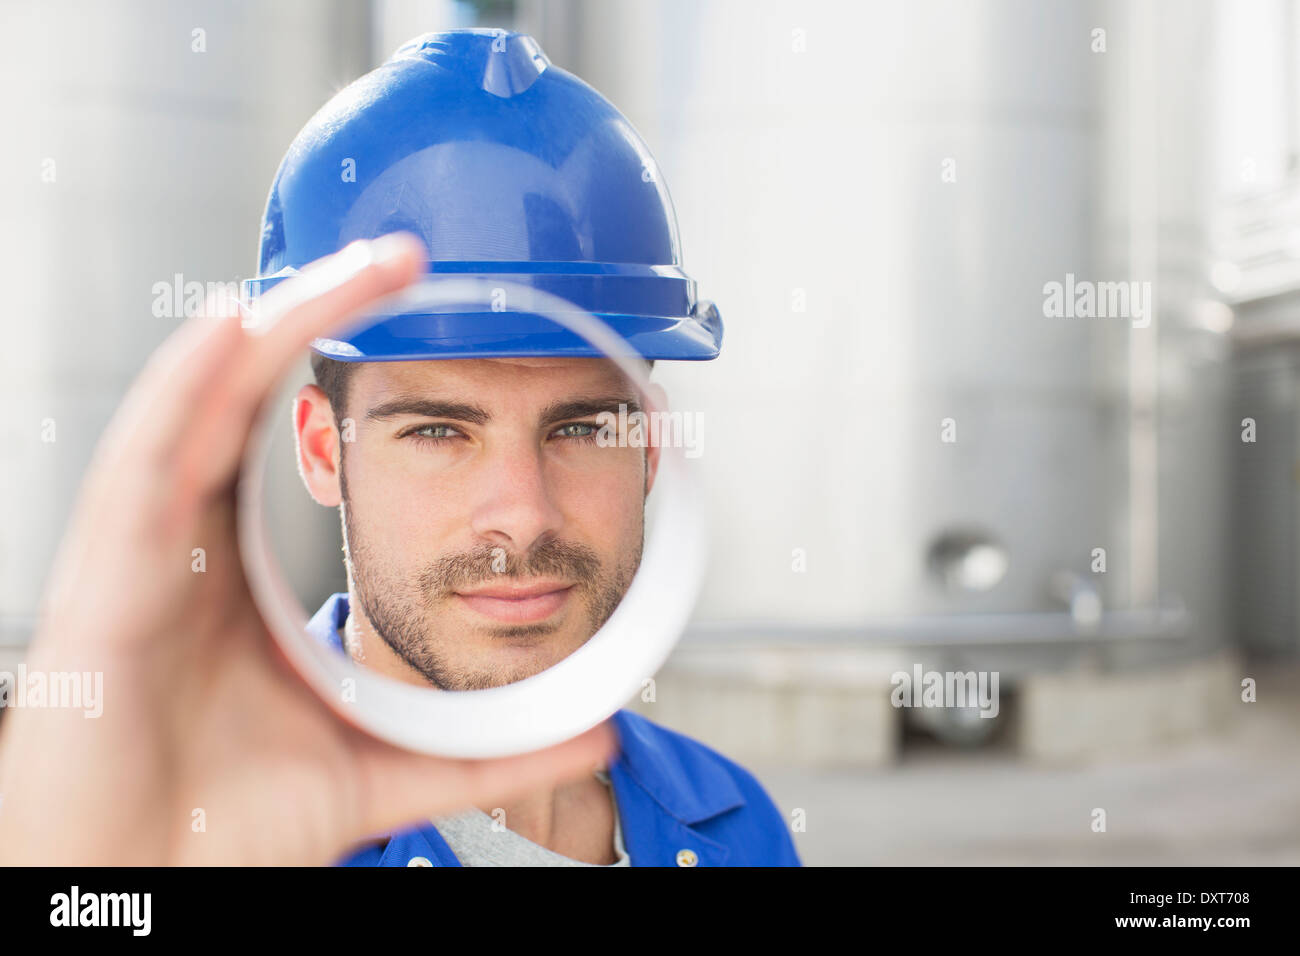 Portrait of worker looking through metal tube Stock Photo